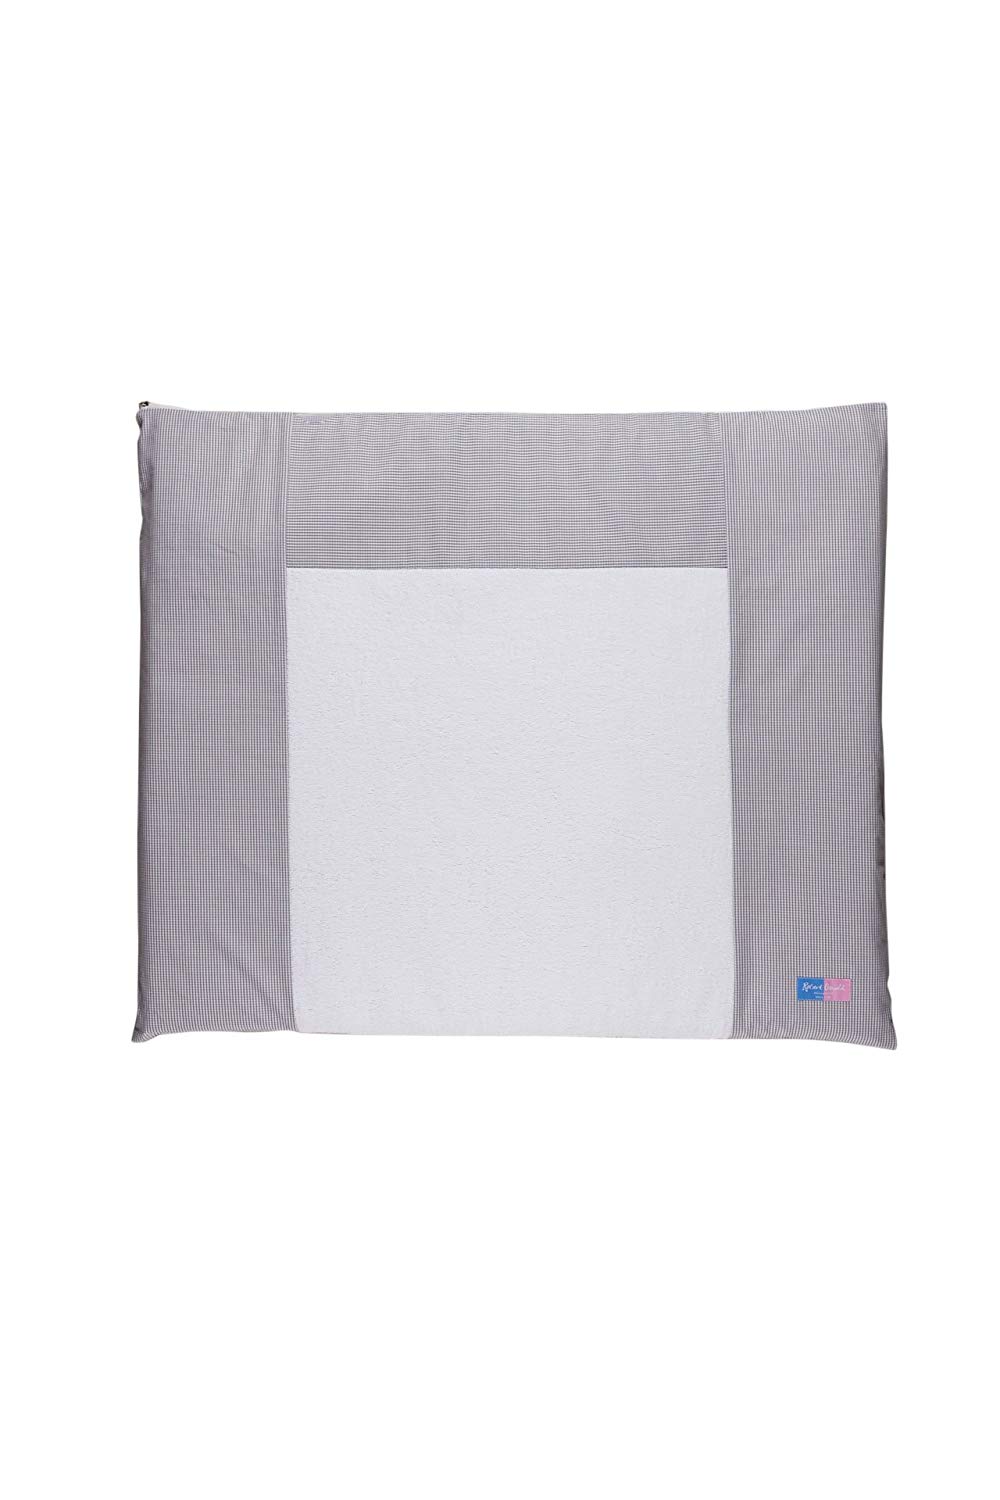 Robert Osswald 1.4.1.1.1.1-K01-11 Changing Mat with Terry Cloth Cover and Inlet 70 cm x 84 cm Blue